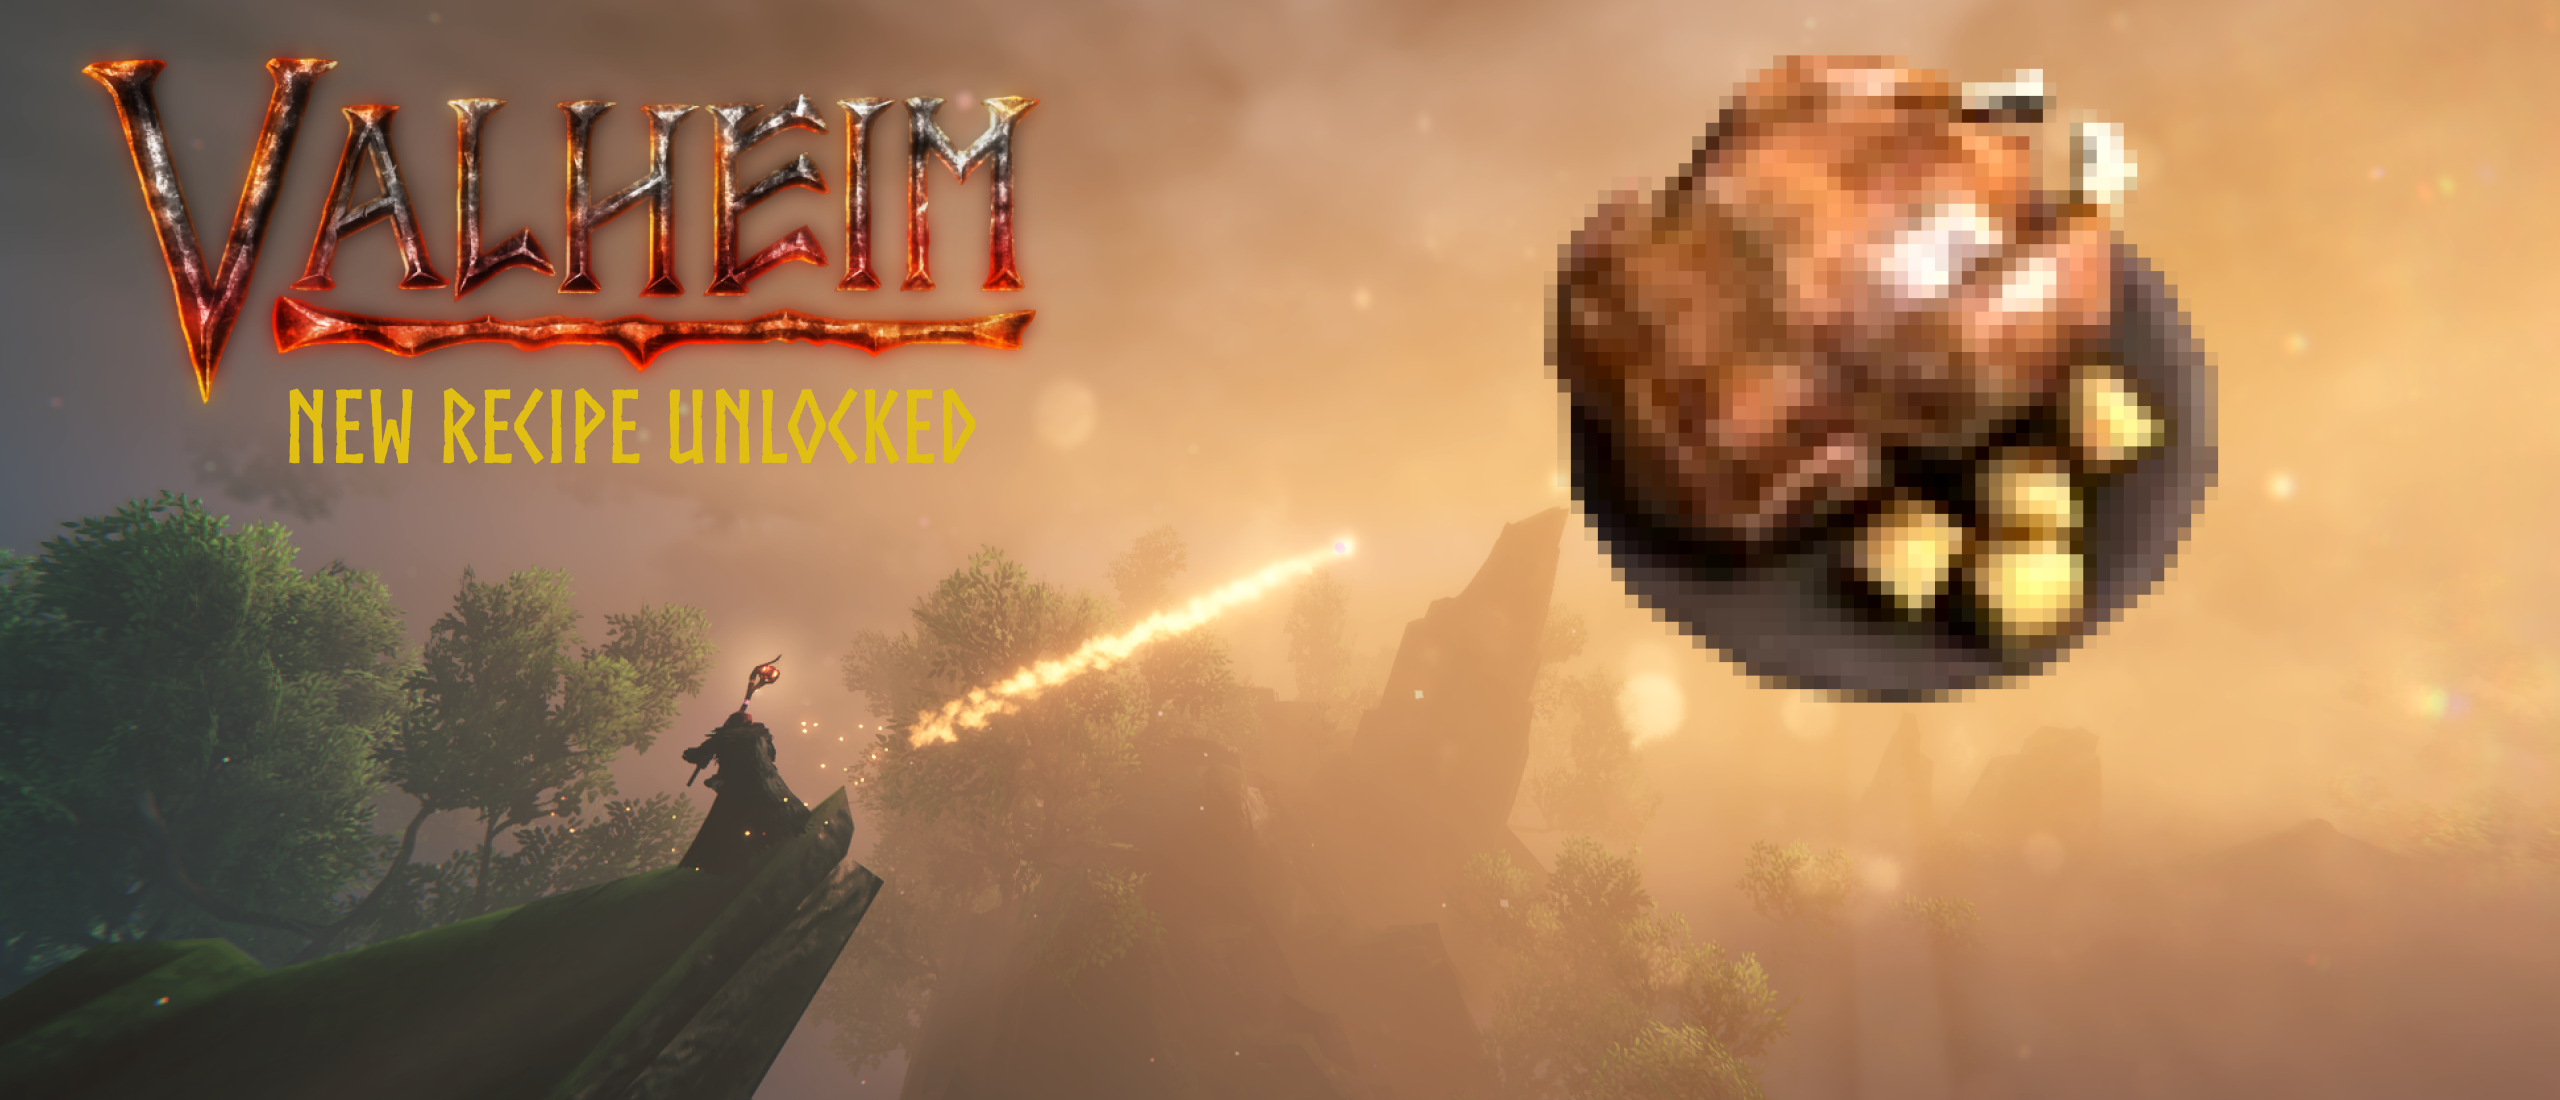 A Viking caster in Valheim destroying a floating honey glazed chicken monster to gain its recipe.